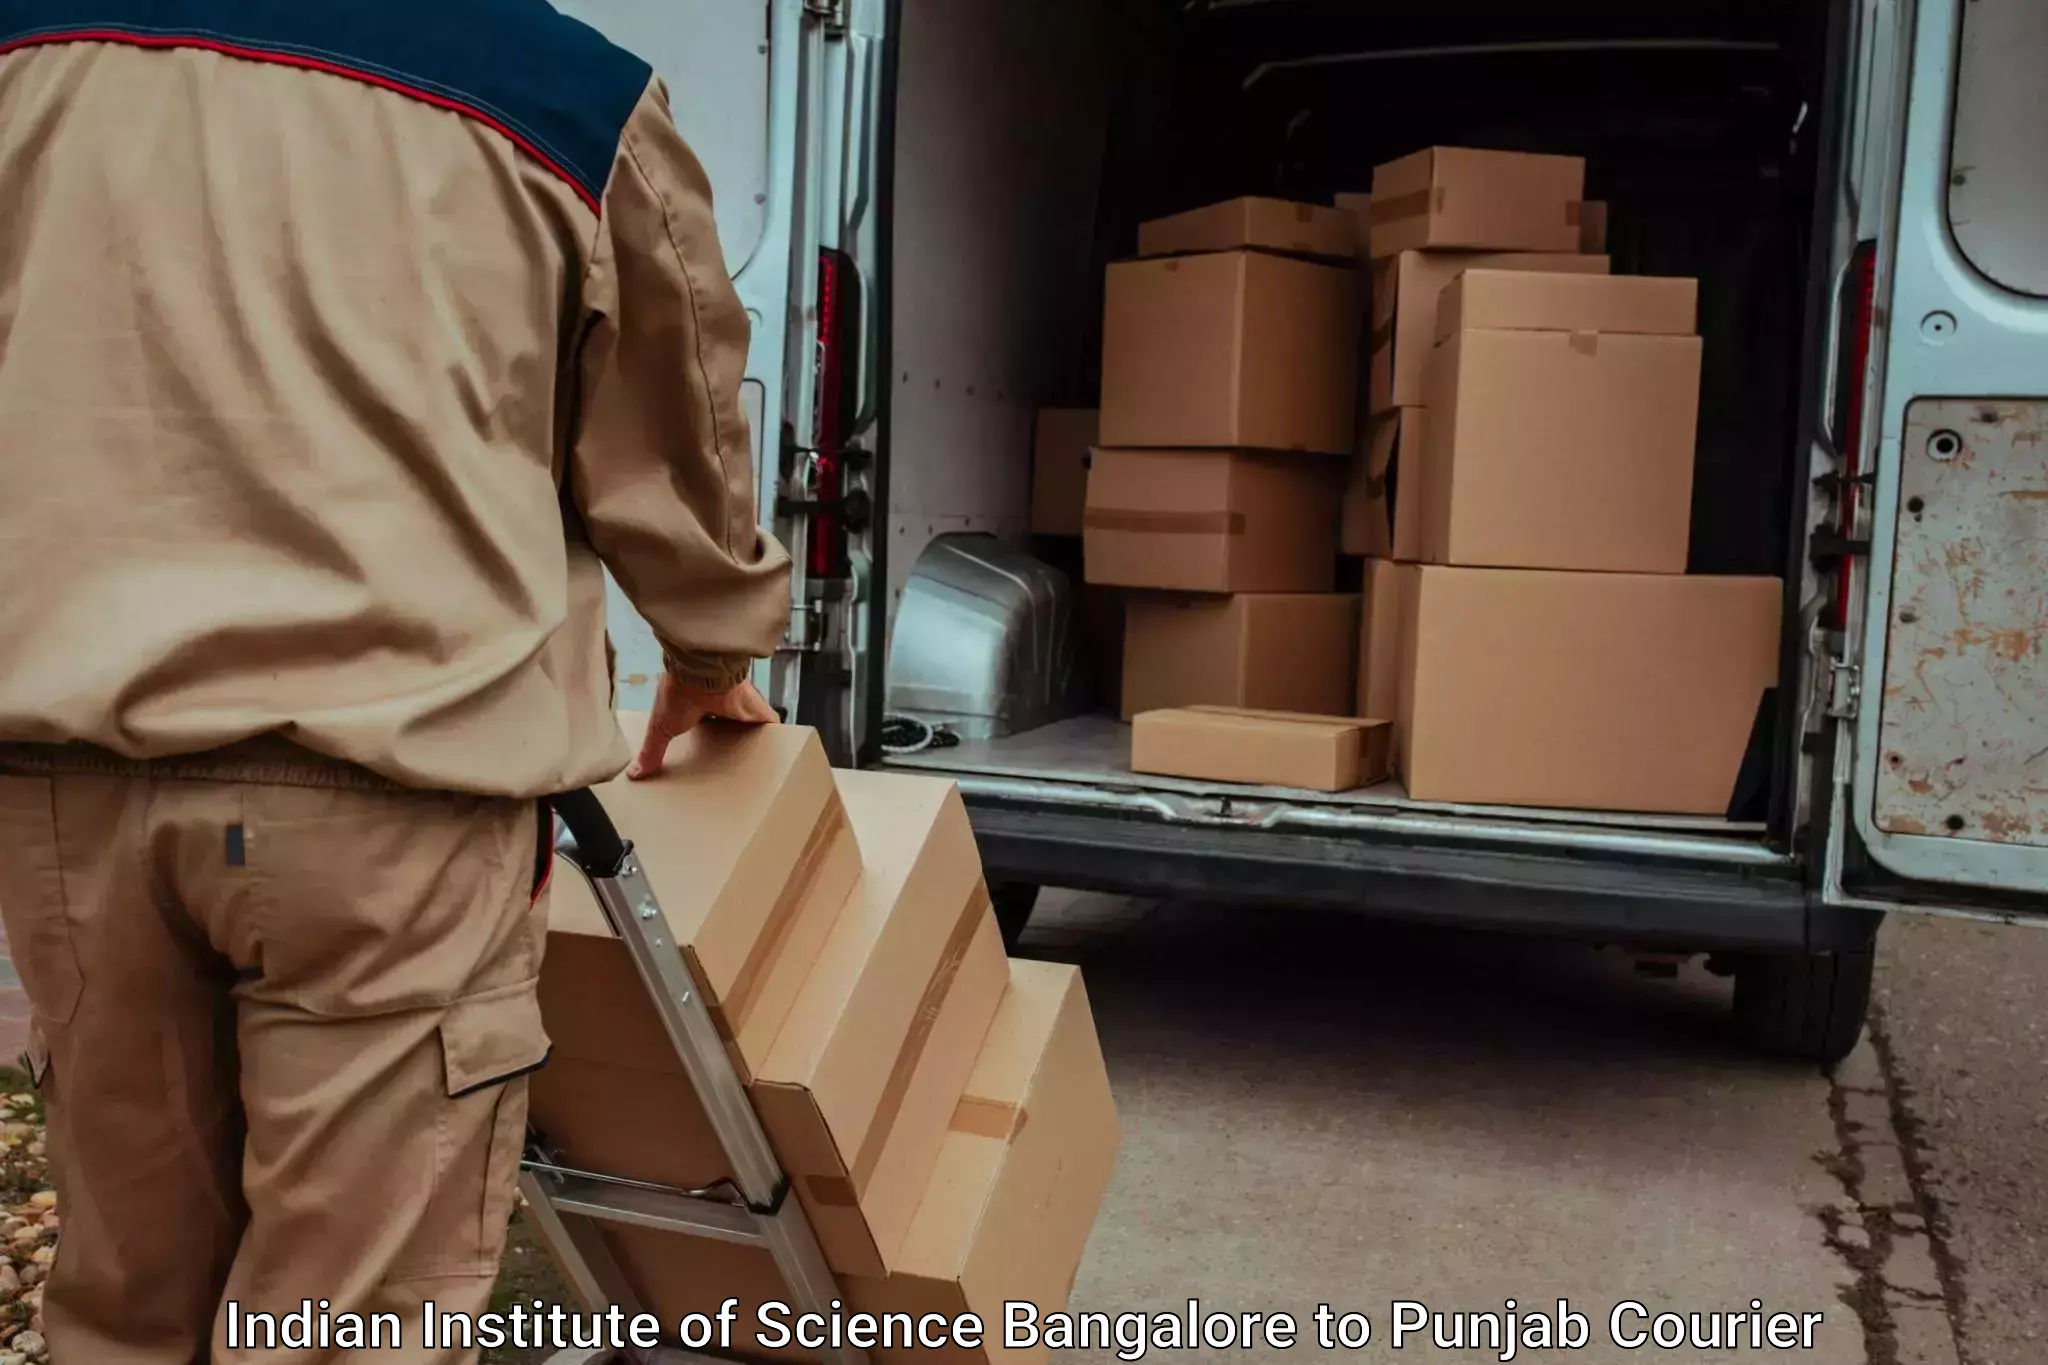 Furniture transport specialists Indian Institute of Science Bangalore to Punjab